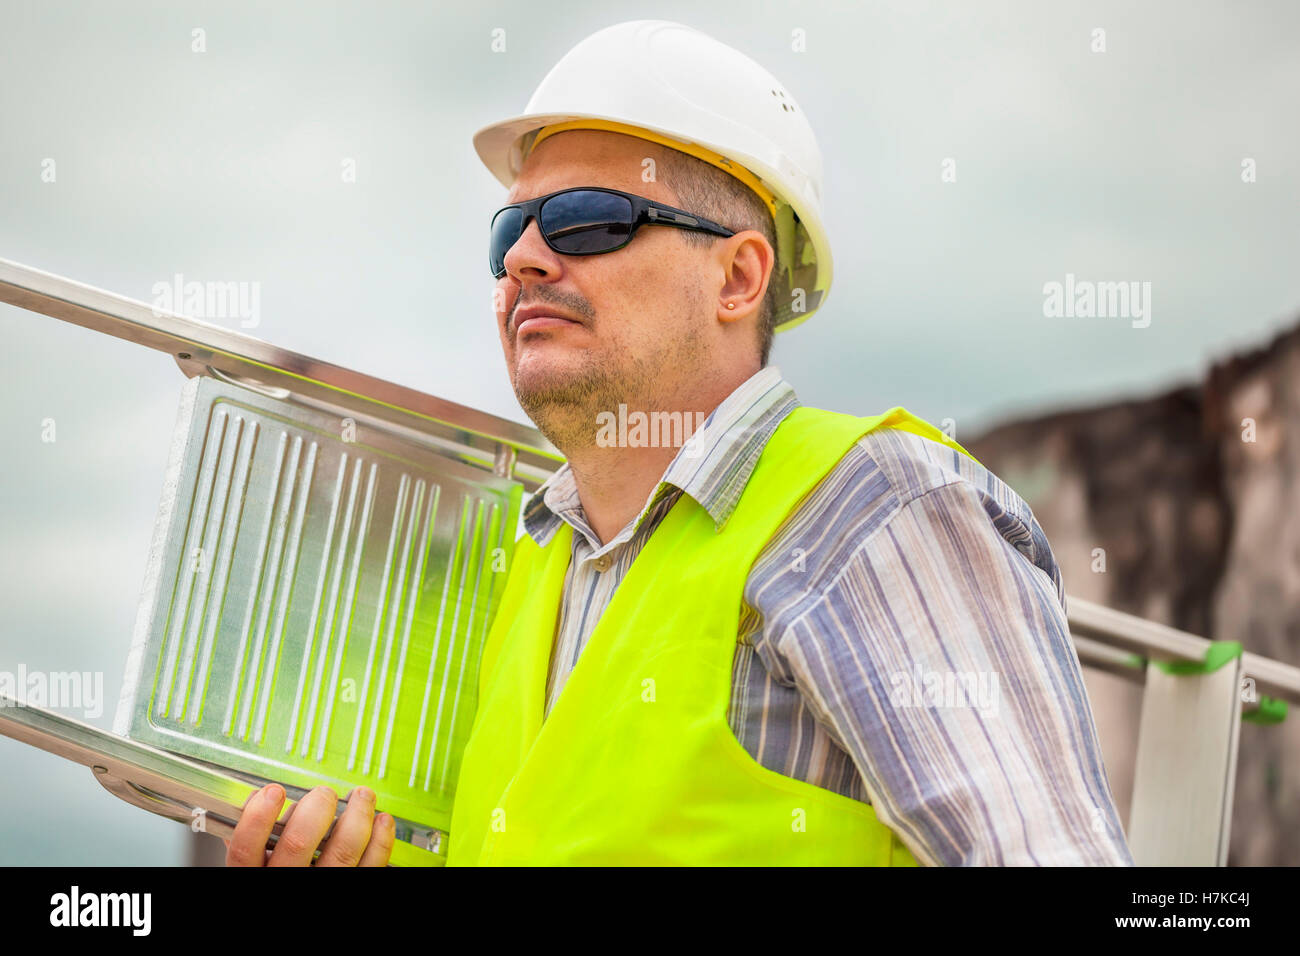 Worker with an aluminum ladder Stock Photo